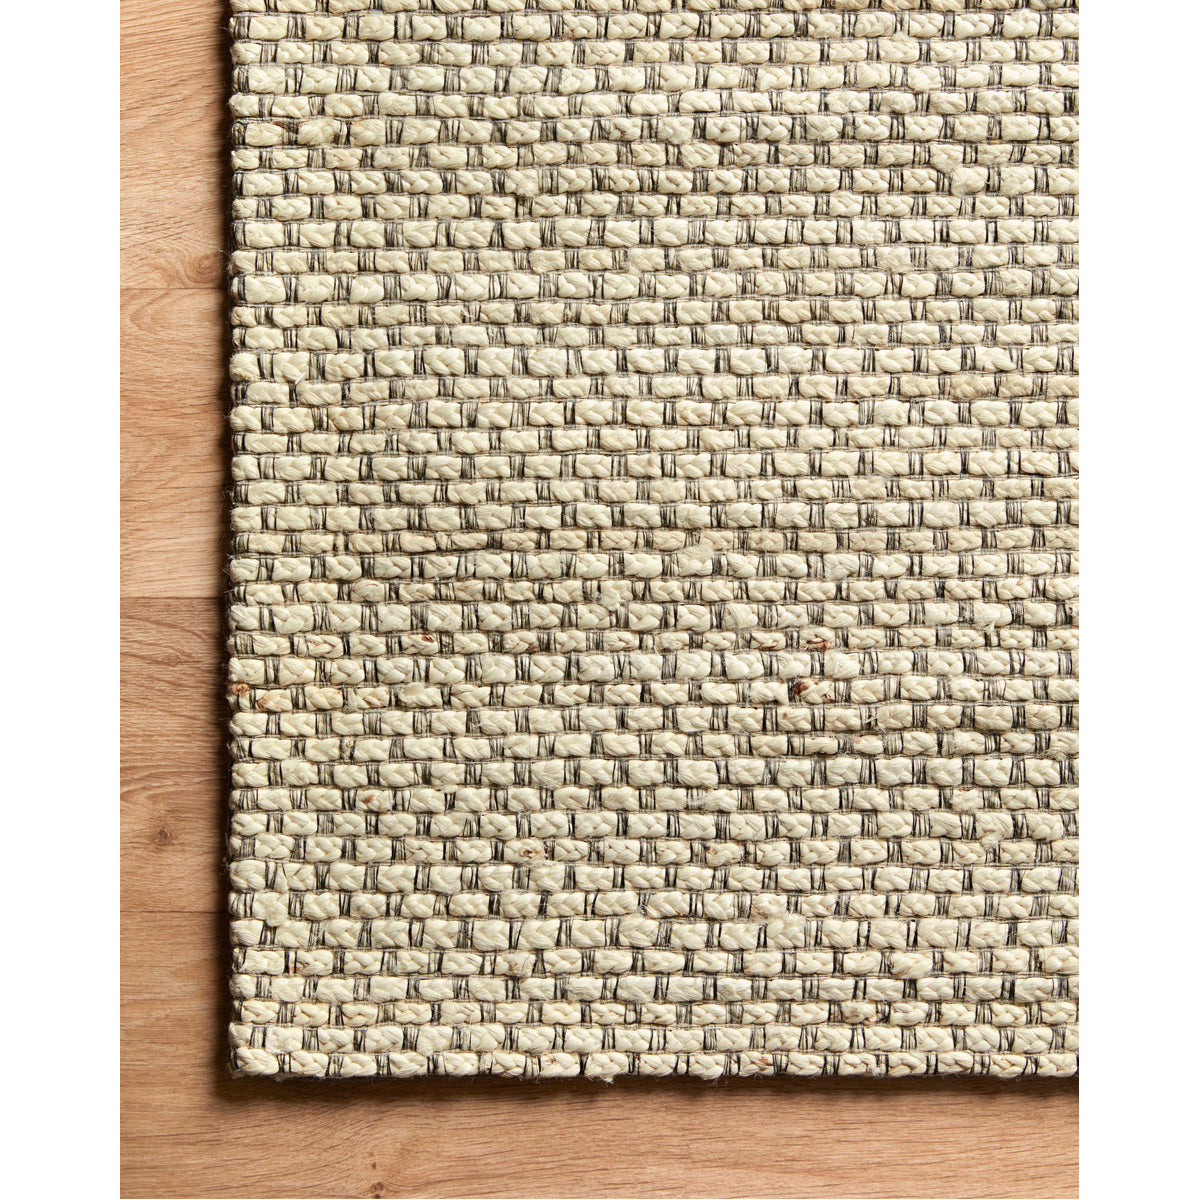 Loloi Lily LIL-01 Hand Woven Rug